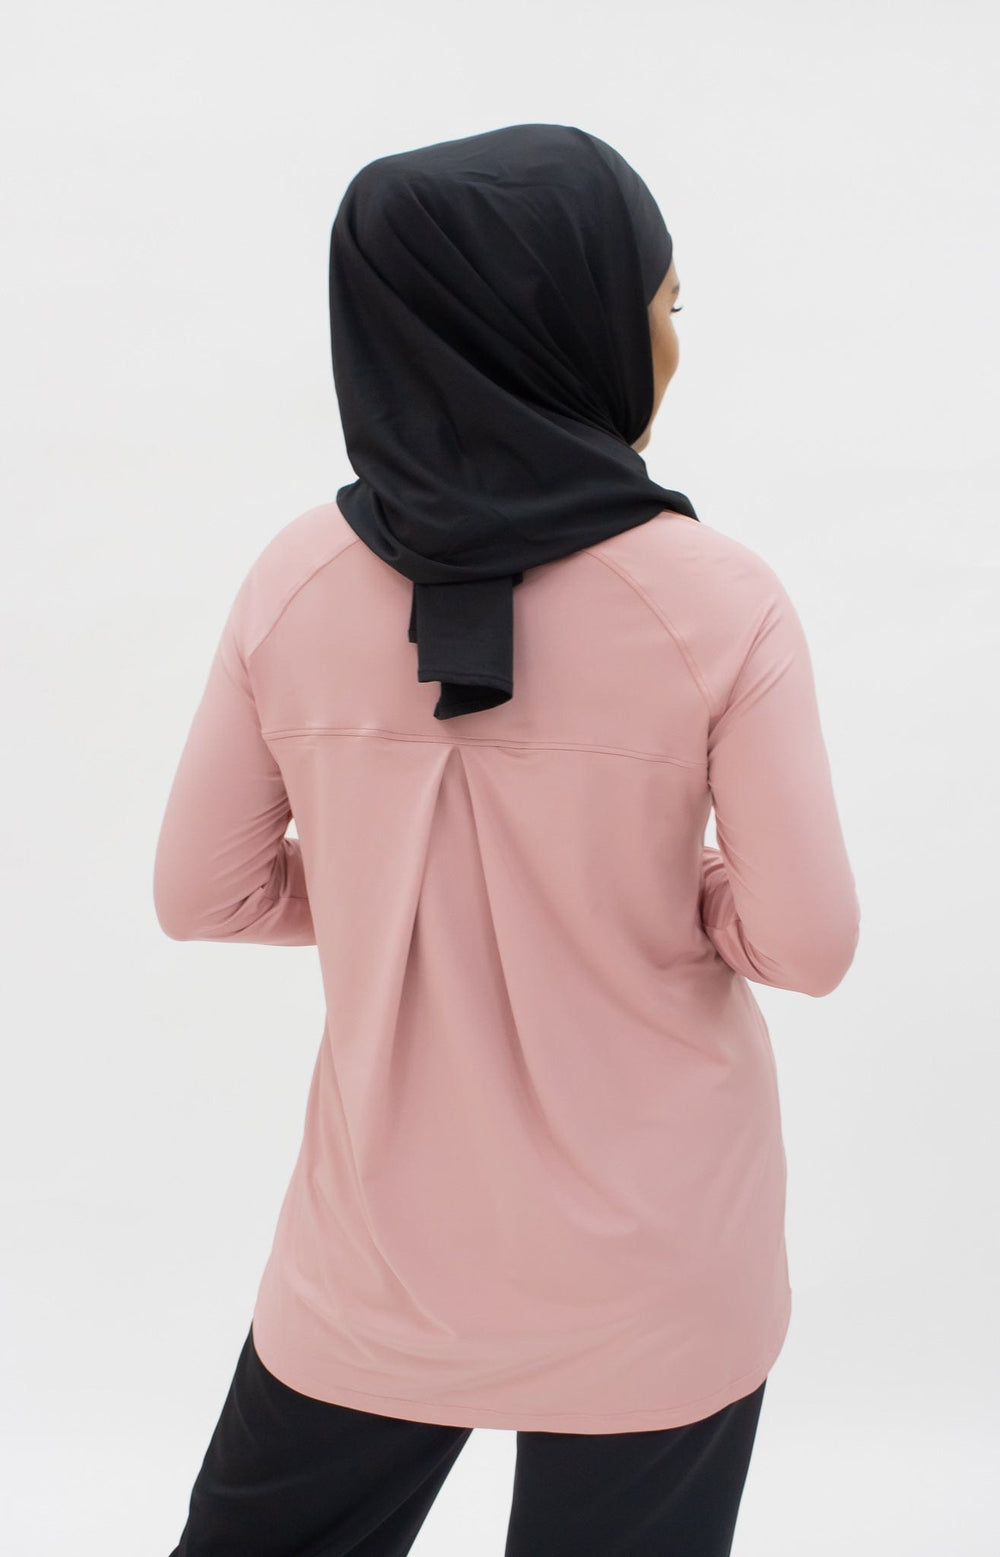 Glowco Exclusive Pleated Top in Blush Pink